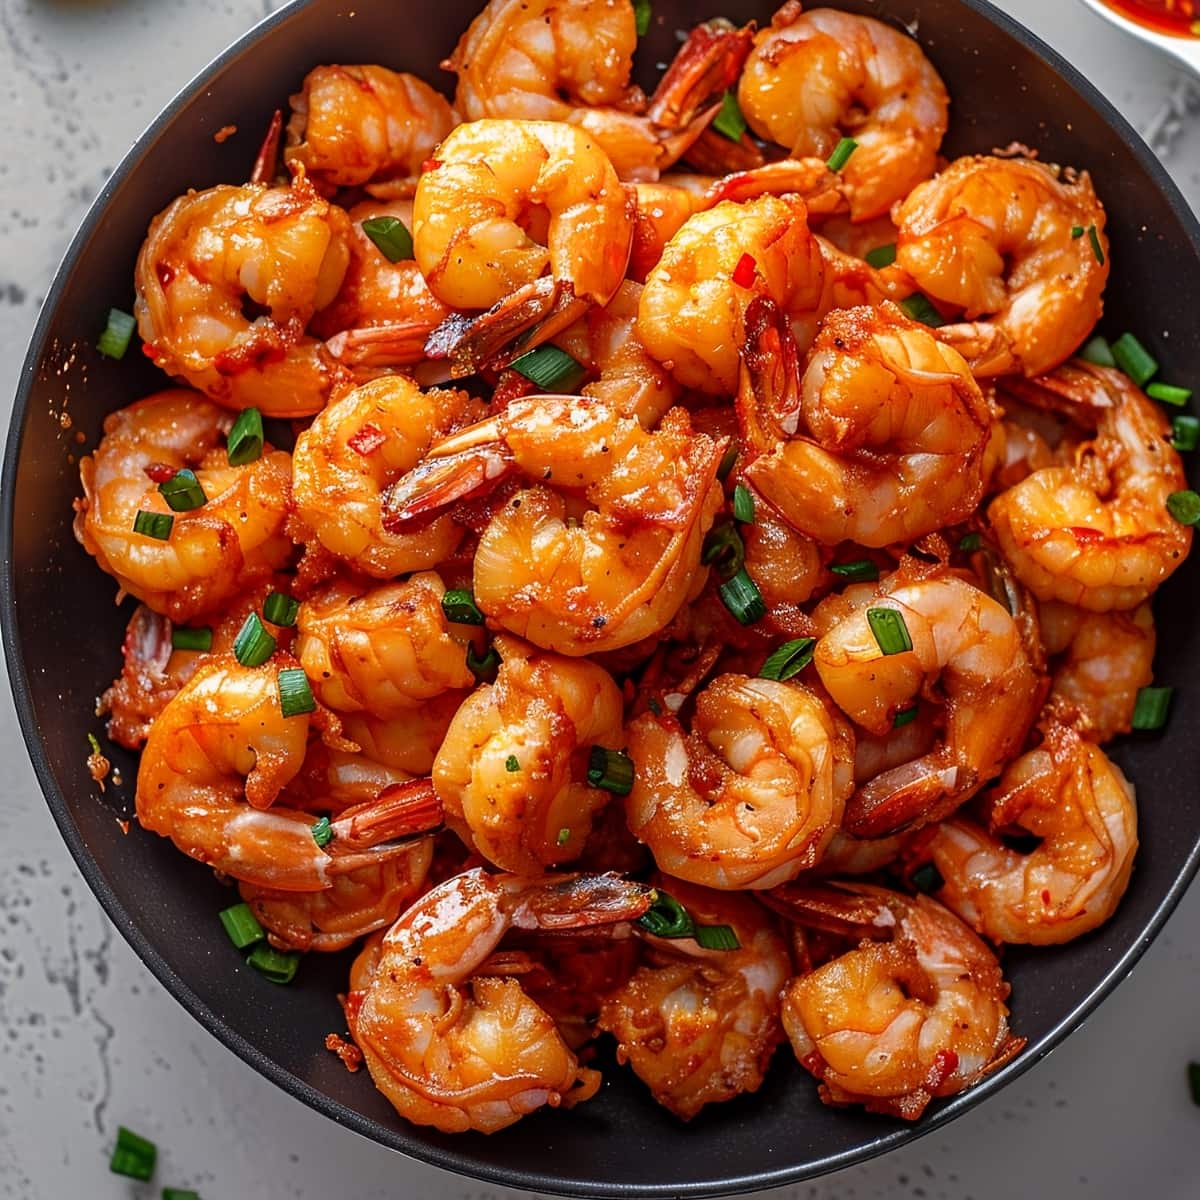 Firecracker shrimp with chopped green onions in a black bowl